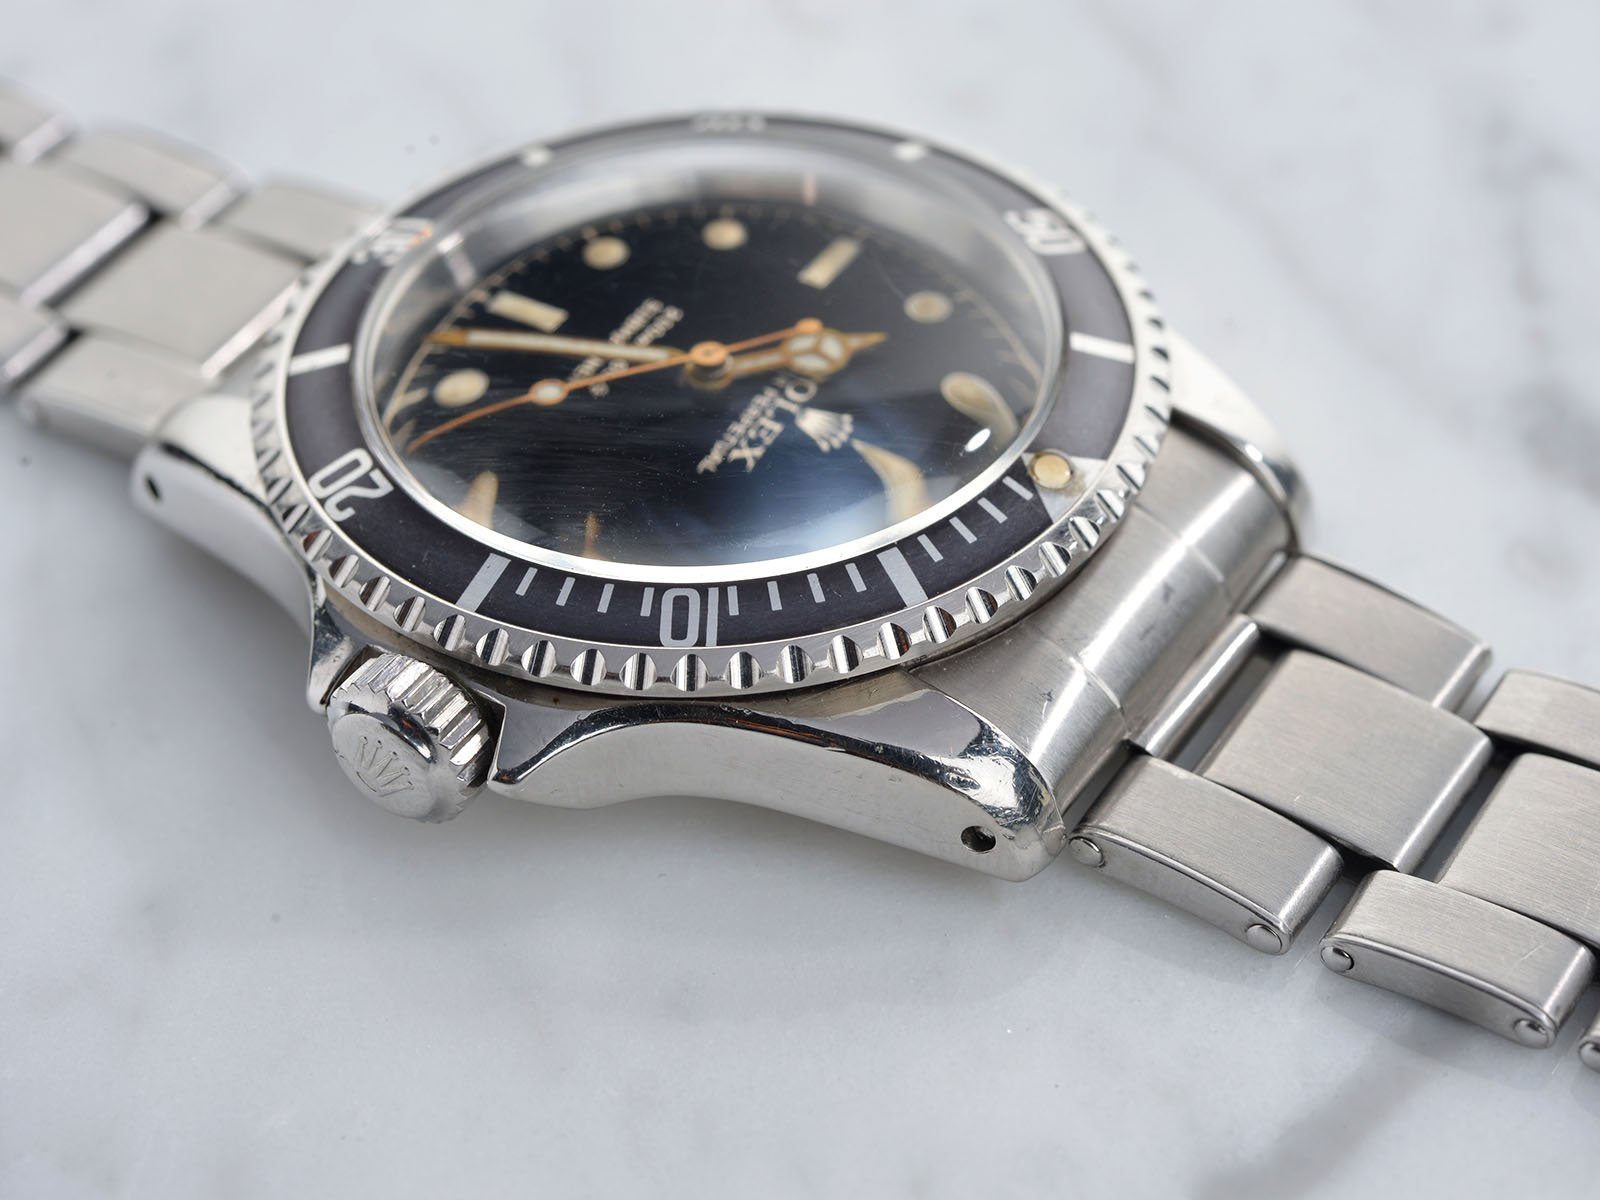 ROLEX 5512 PCG GILT CHAPTER RING EXCLAMATION POINT SUBMARINER